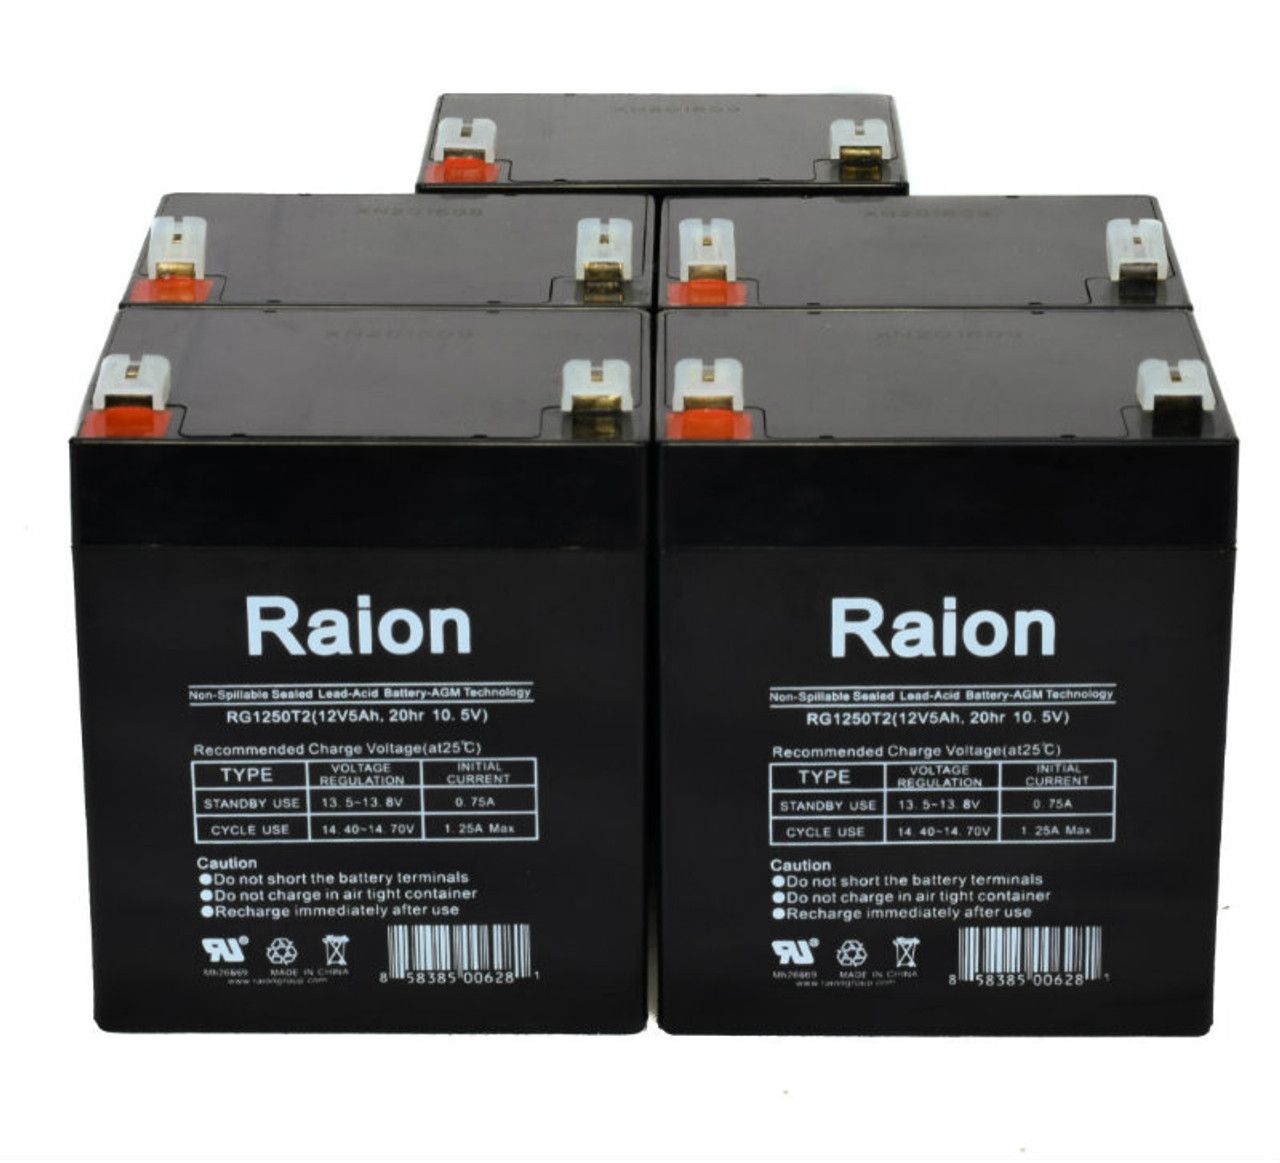 Raion Power 12V 5Ah RG1250T2 Replacement Lead Acid Battery for CBB NP4-12 - 5 Pack